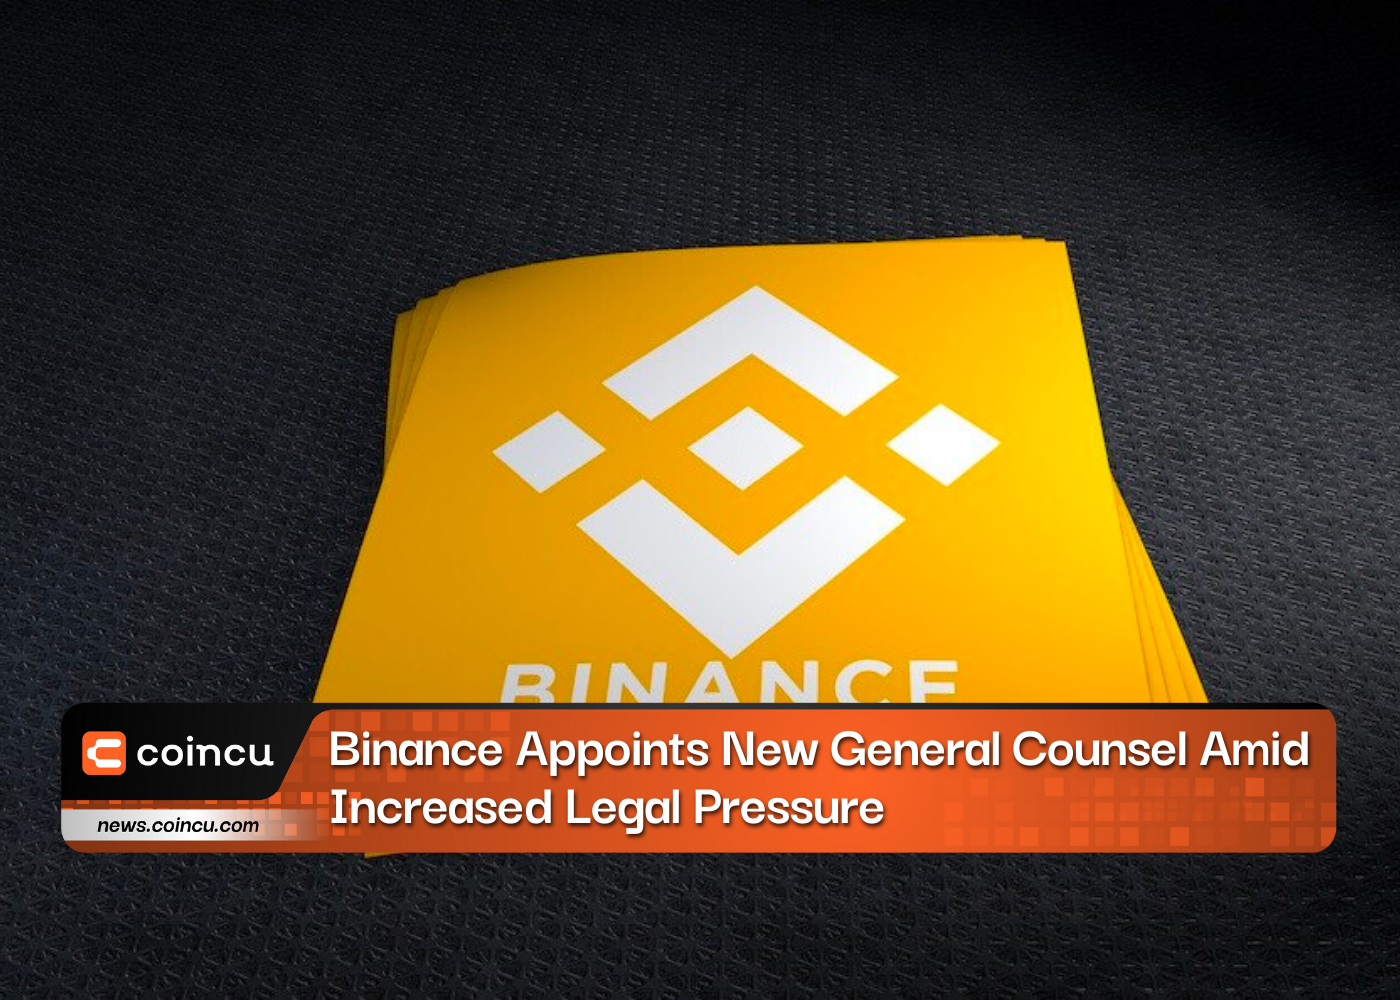 Binance Appoints New General Counsel Amid Increased Legal Pressure